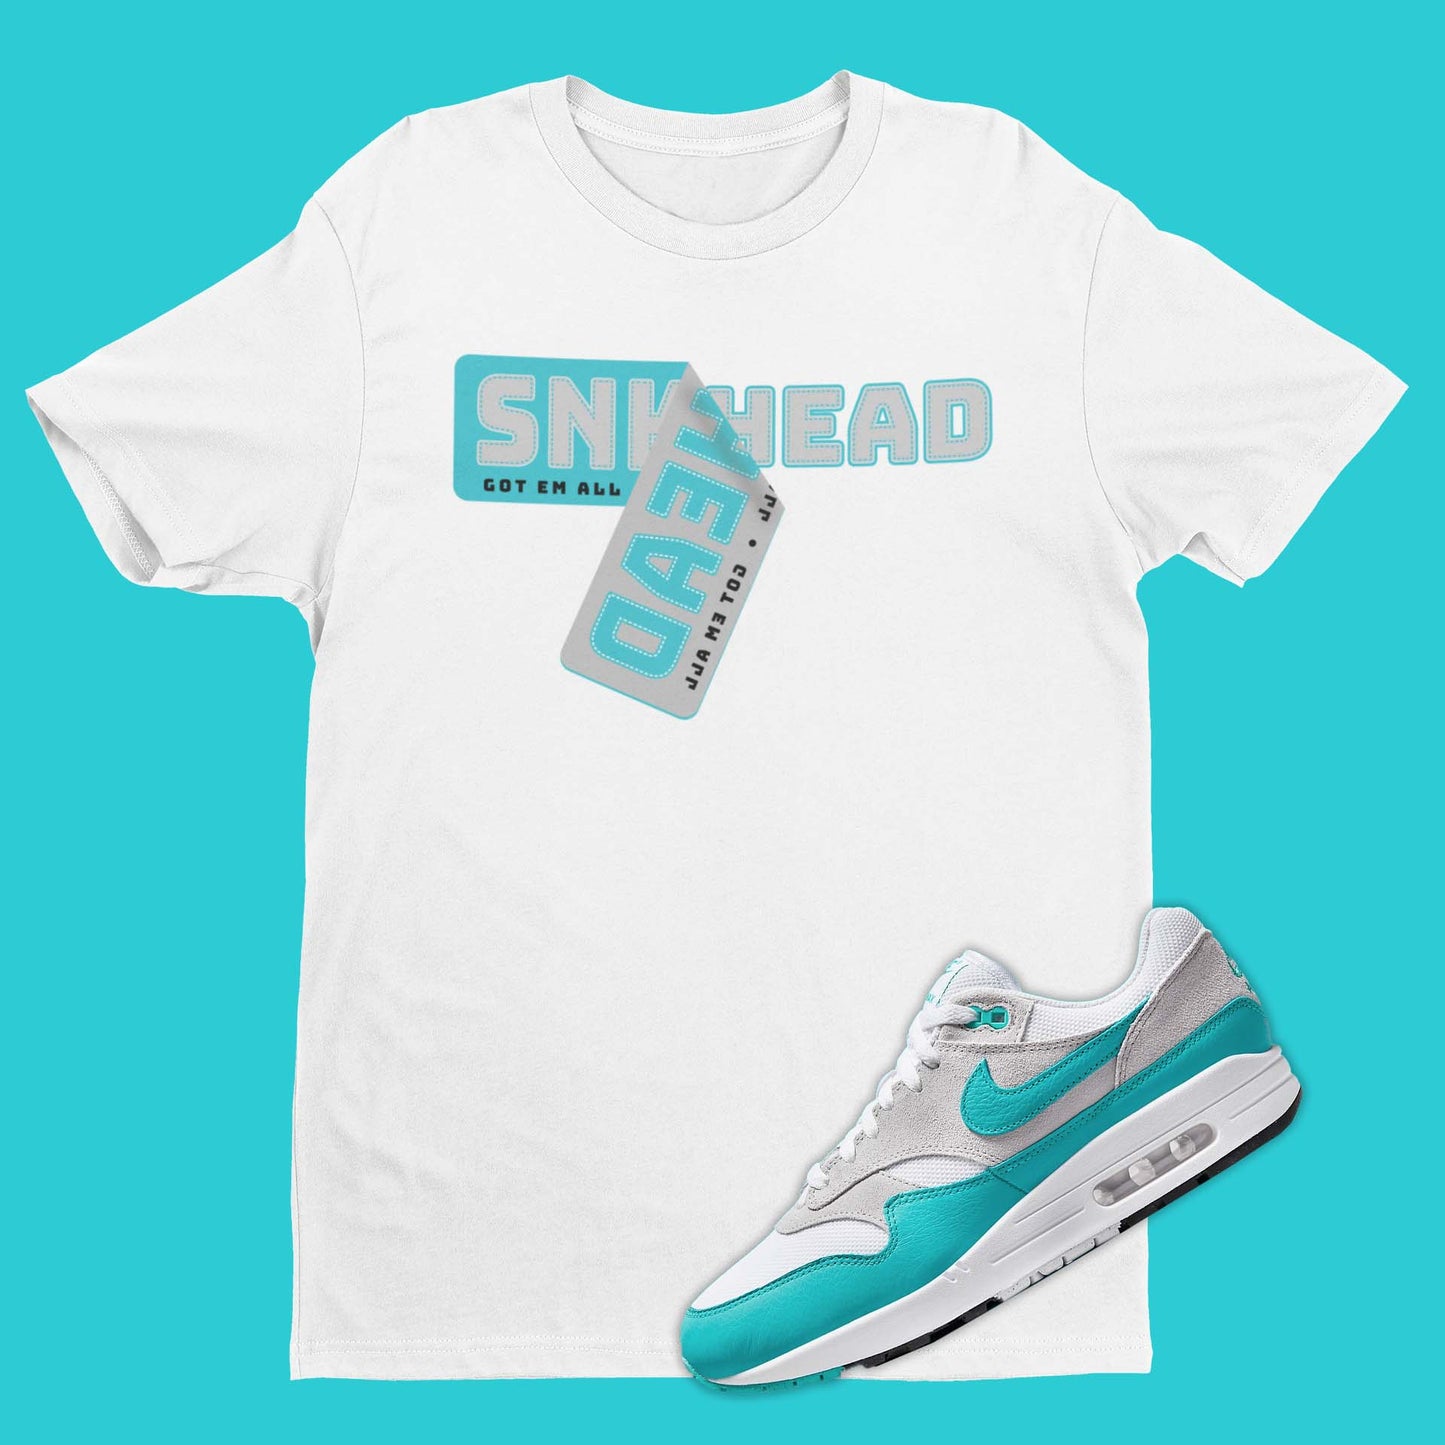 Nike Air Max 1 Clear Jade shirt in white color with 'sneakerhead' on the front